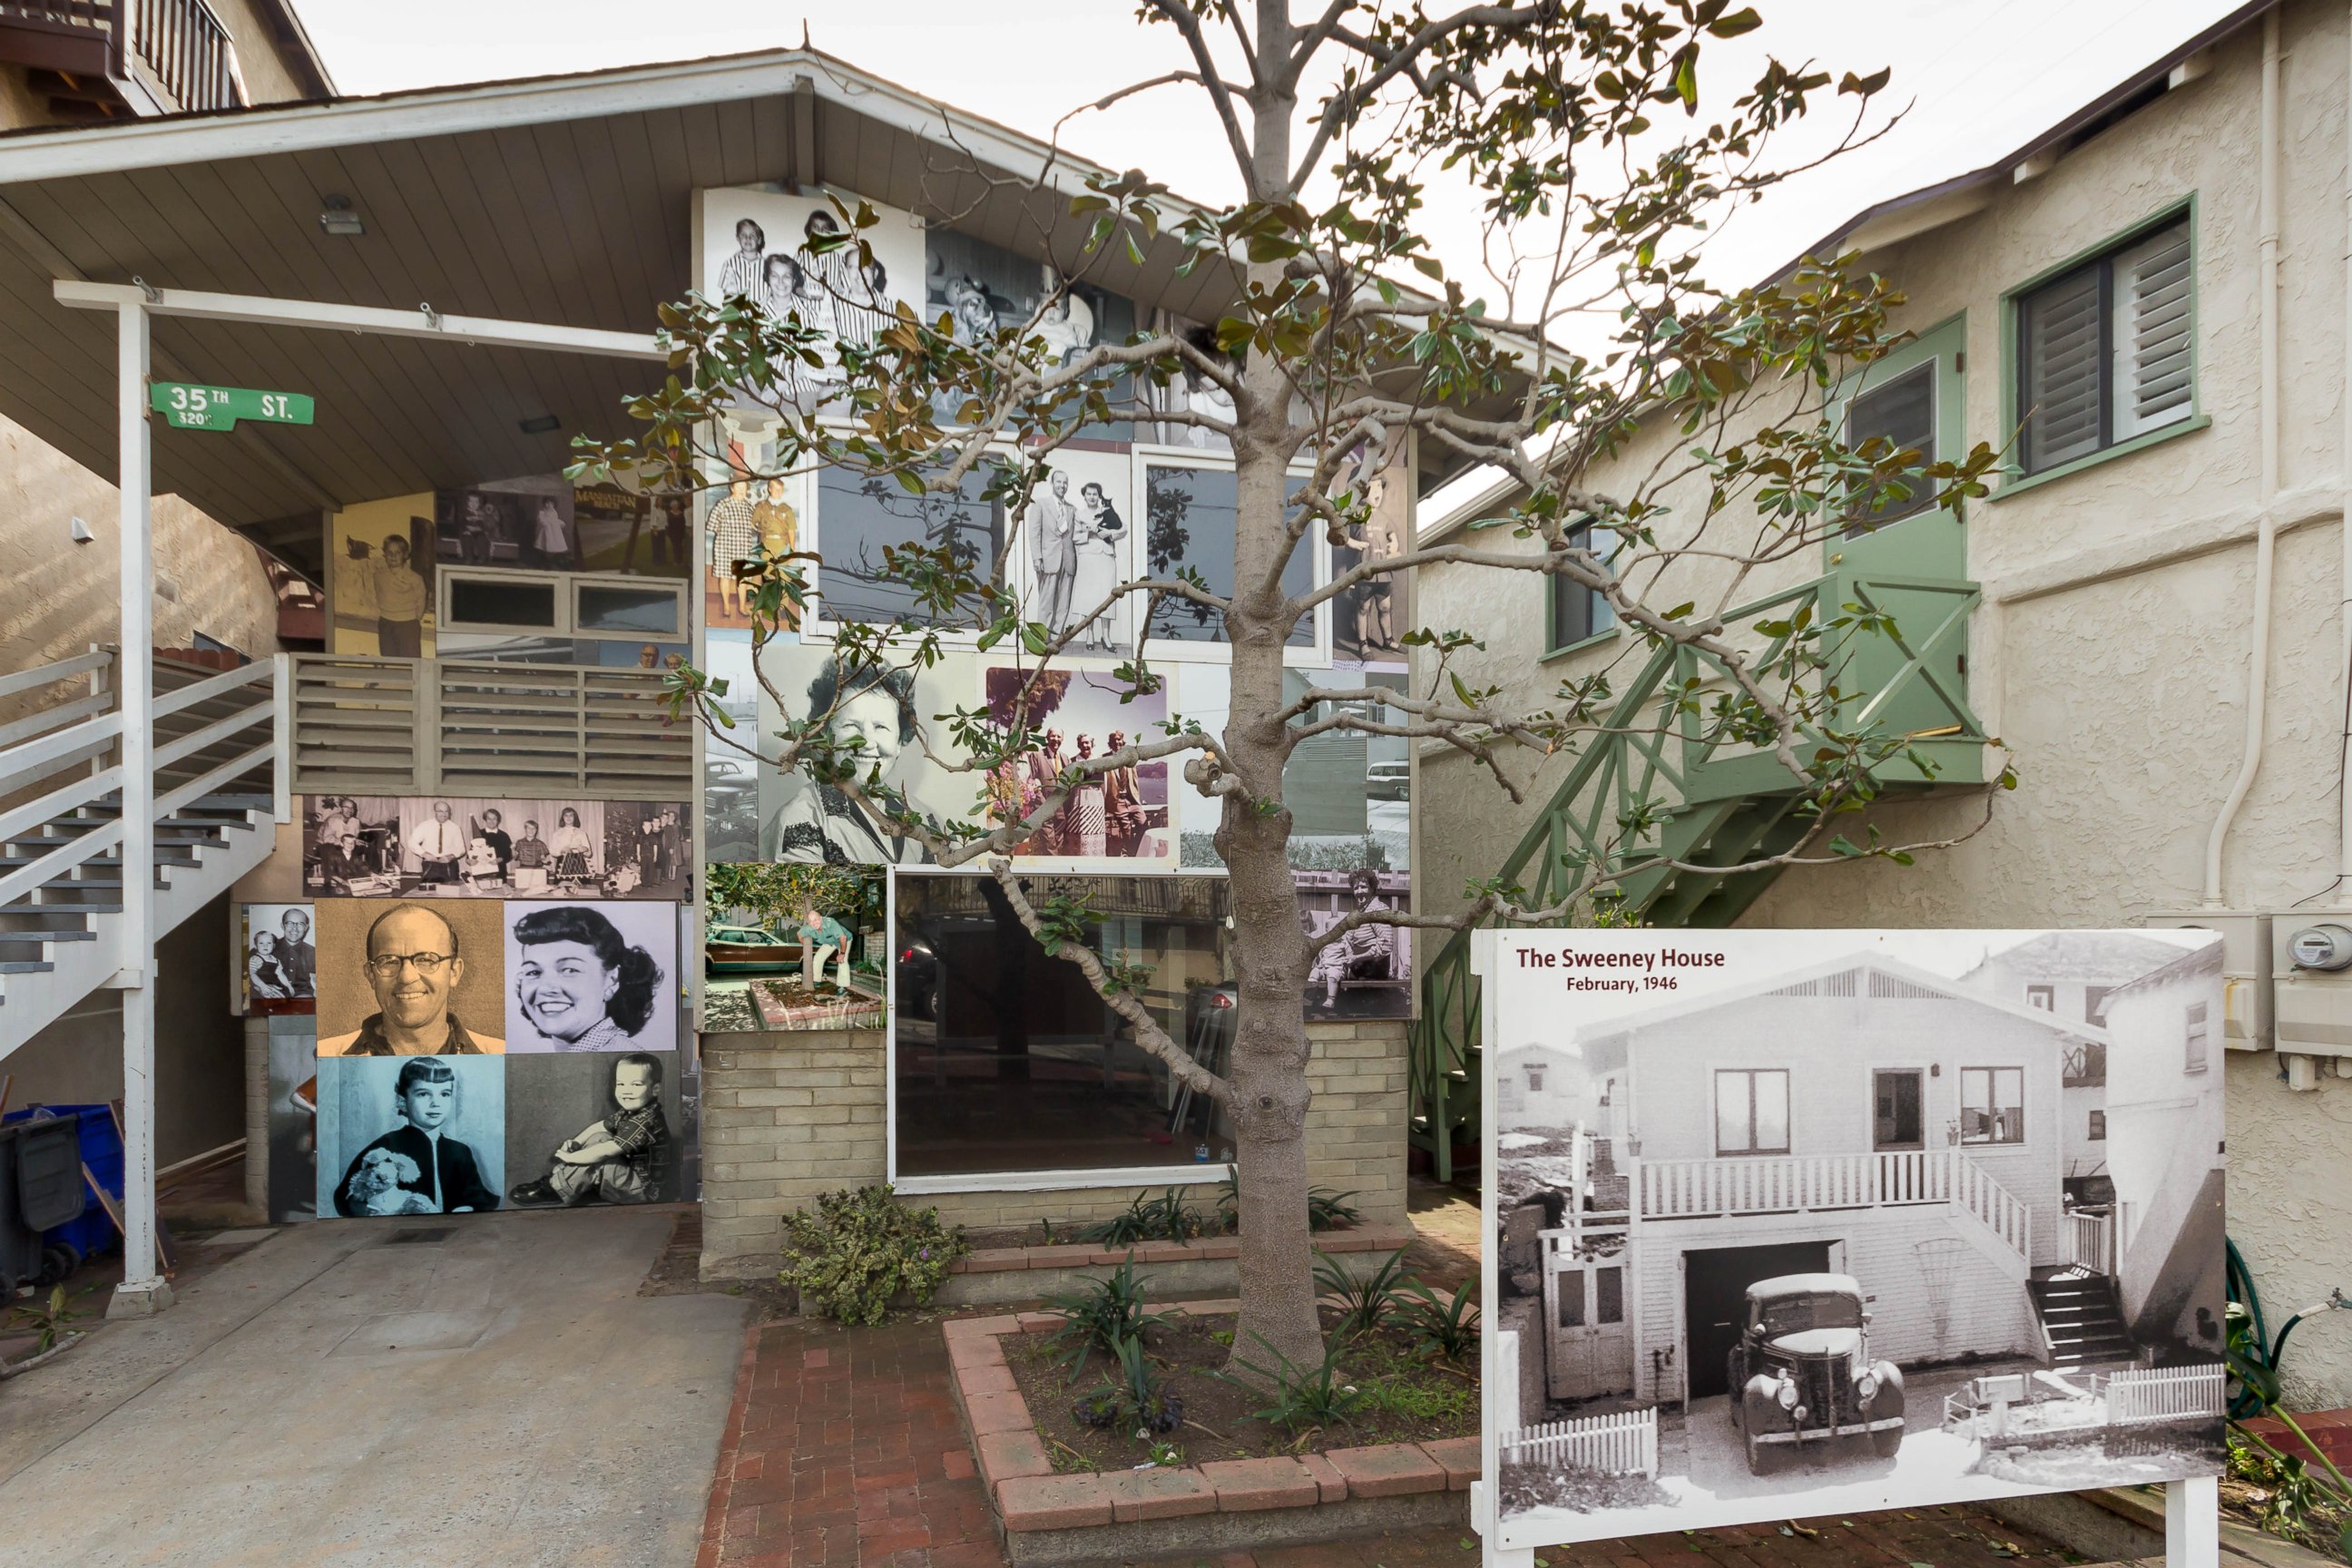 PHOTO: Gary Sweeney created the installation titled "A Manhattan Beach Memoir: 1945-2015" to have one final goodbye to his childhood home. He covered the house in 100 family photos taken by his late father, Mike Sweeney.